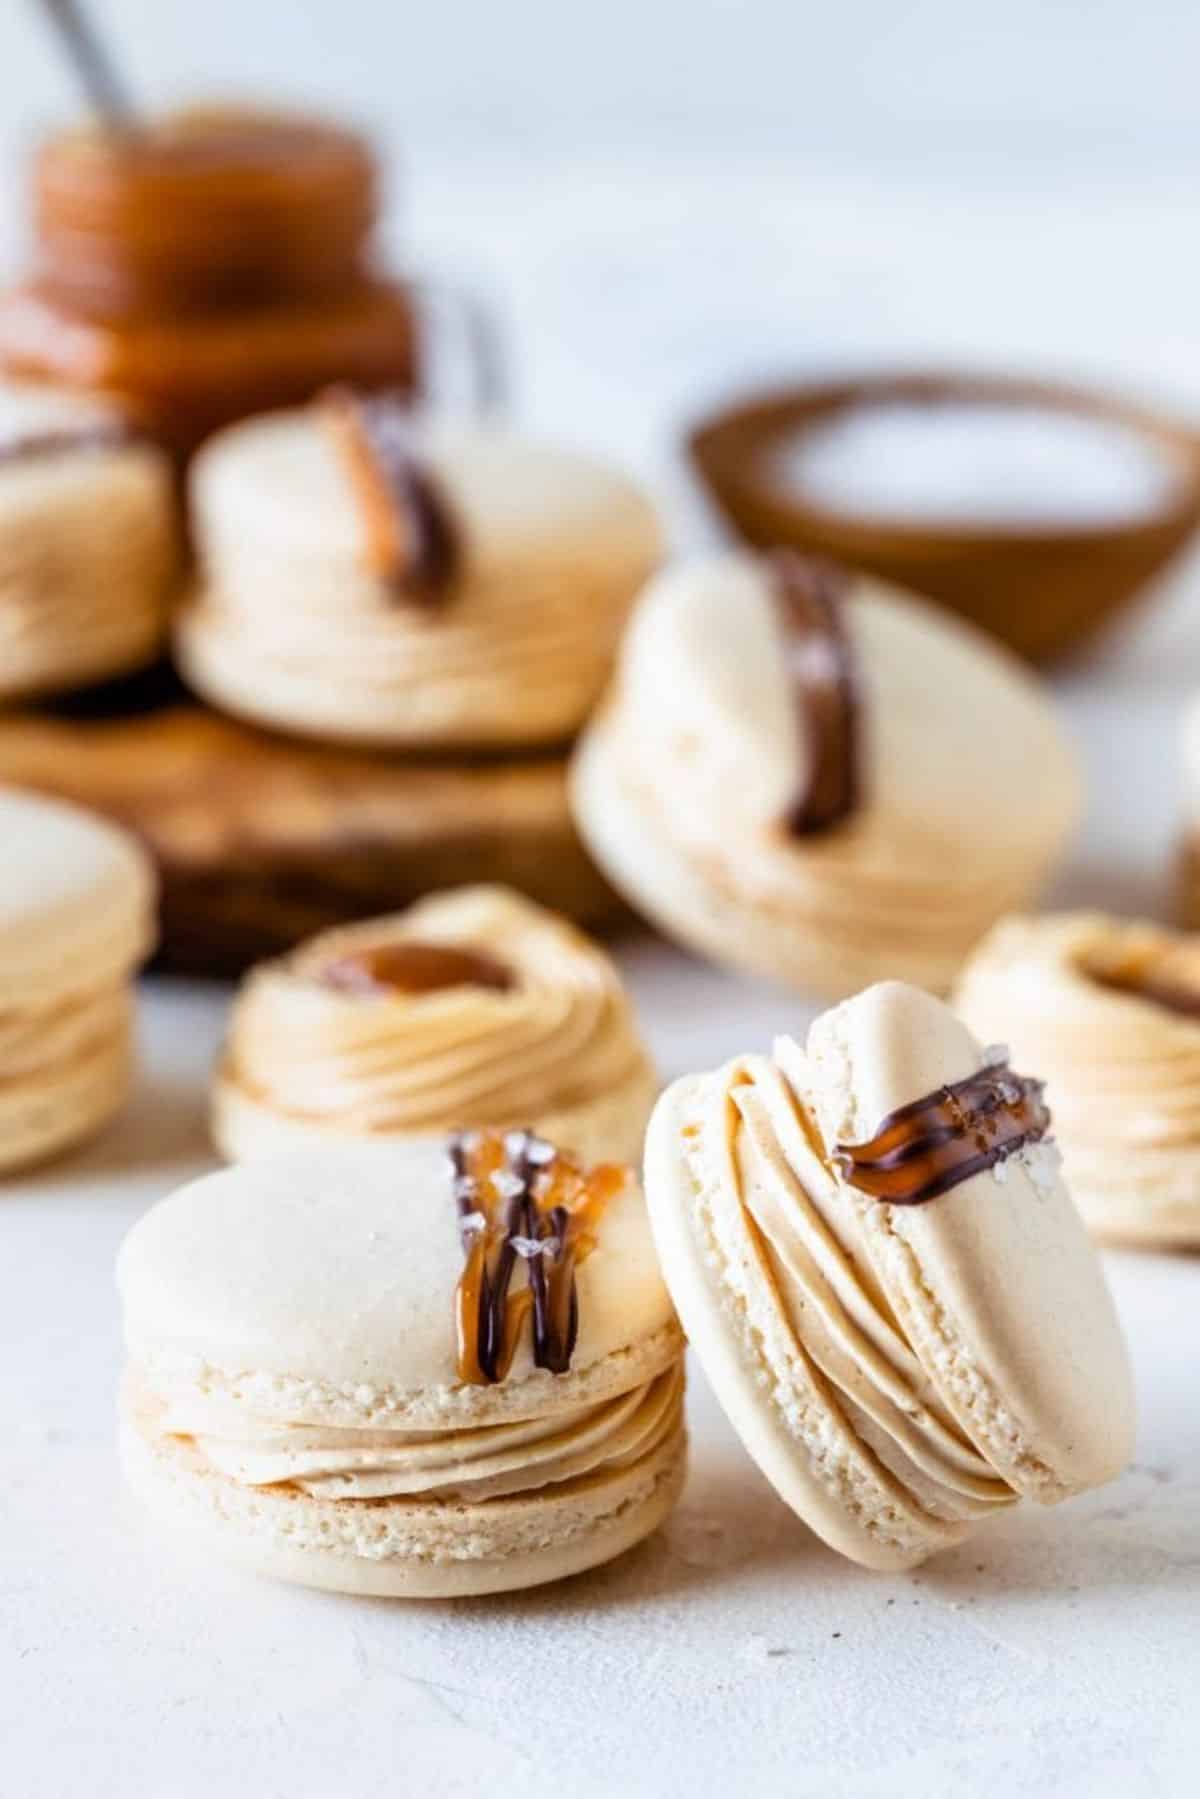 Delicious salted caramel macarons on a table.